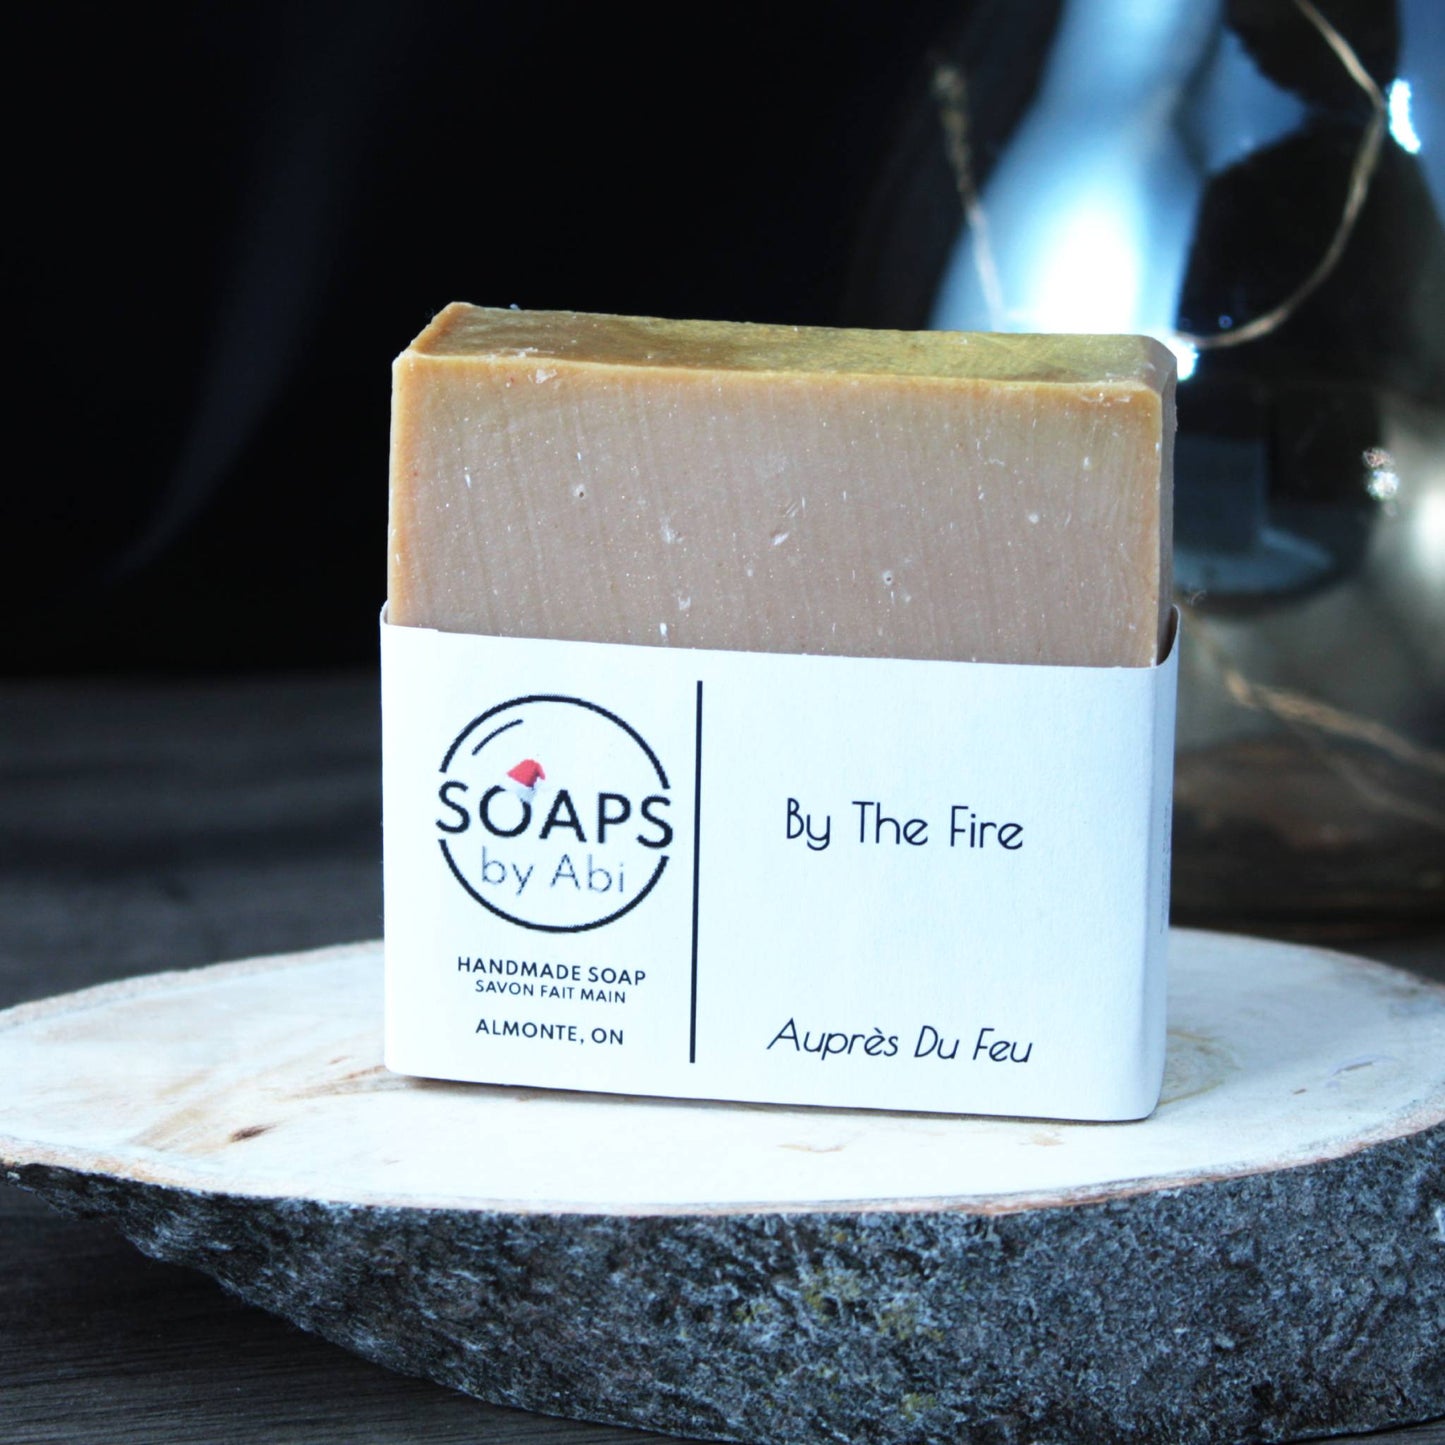 By the Fire soap